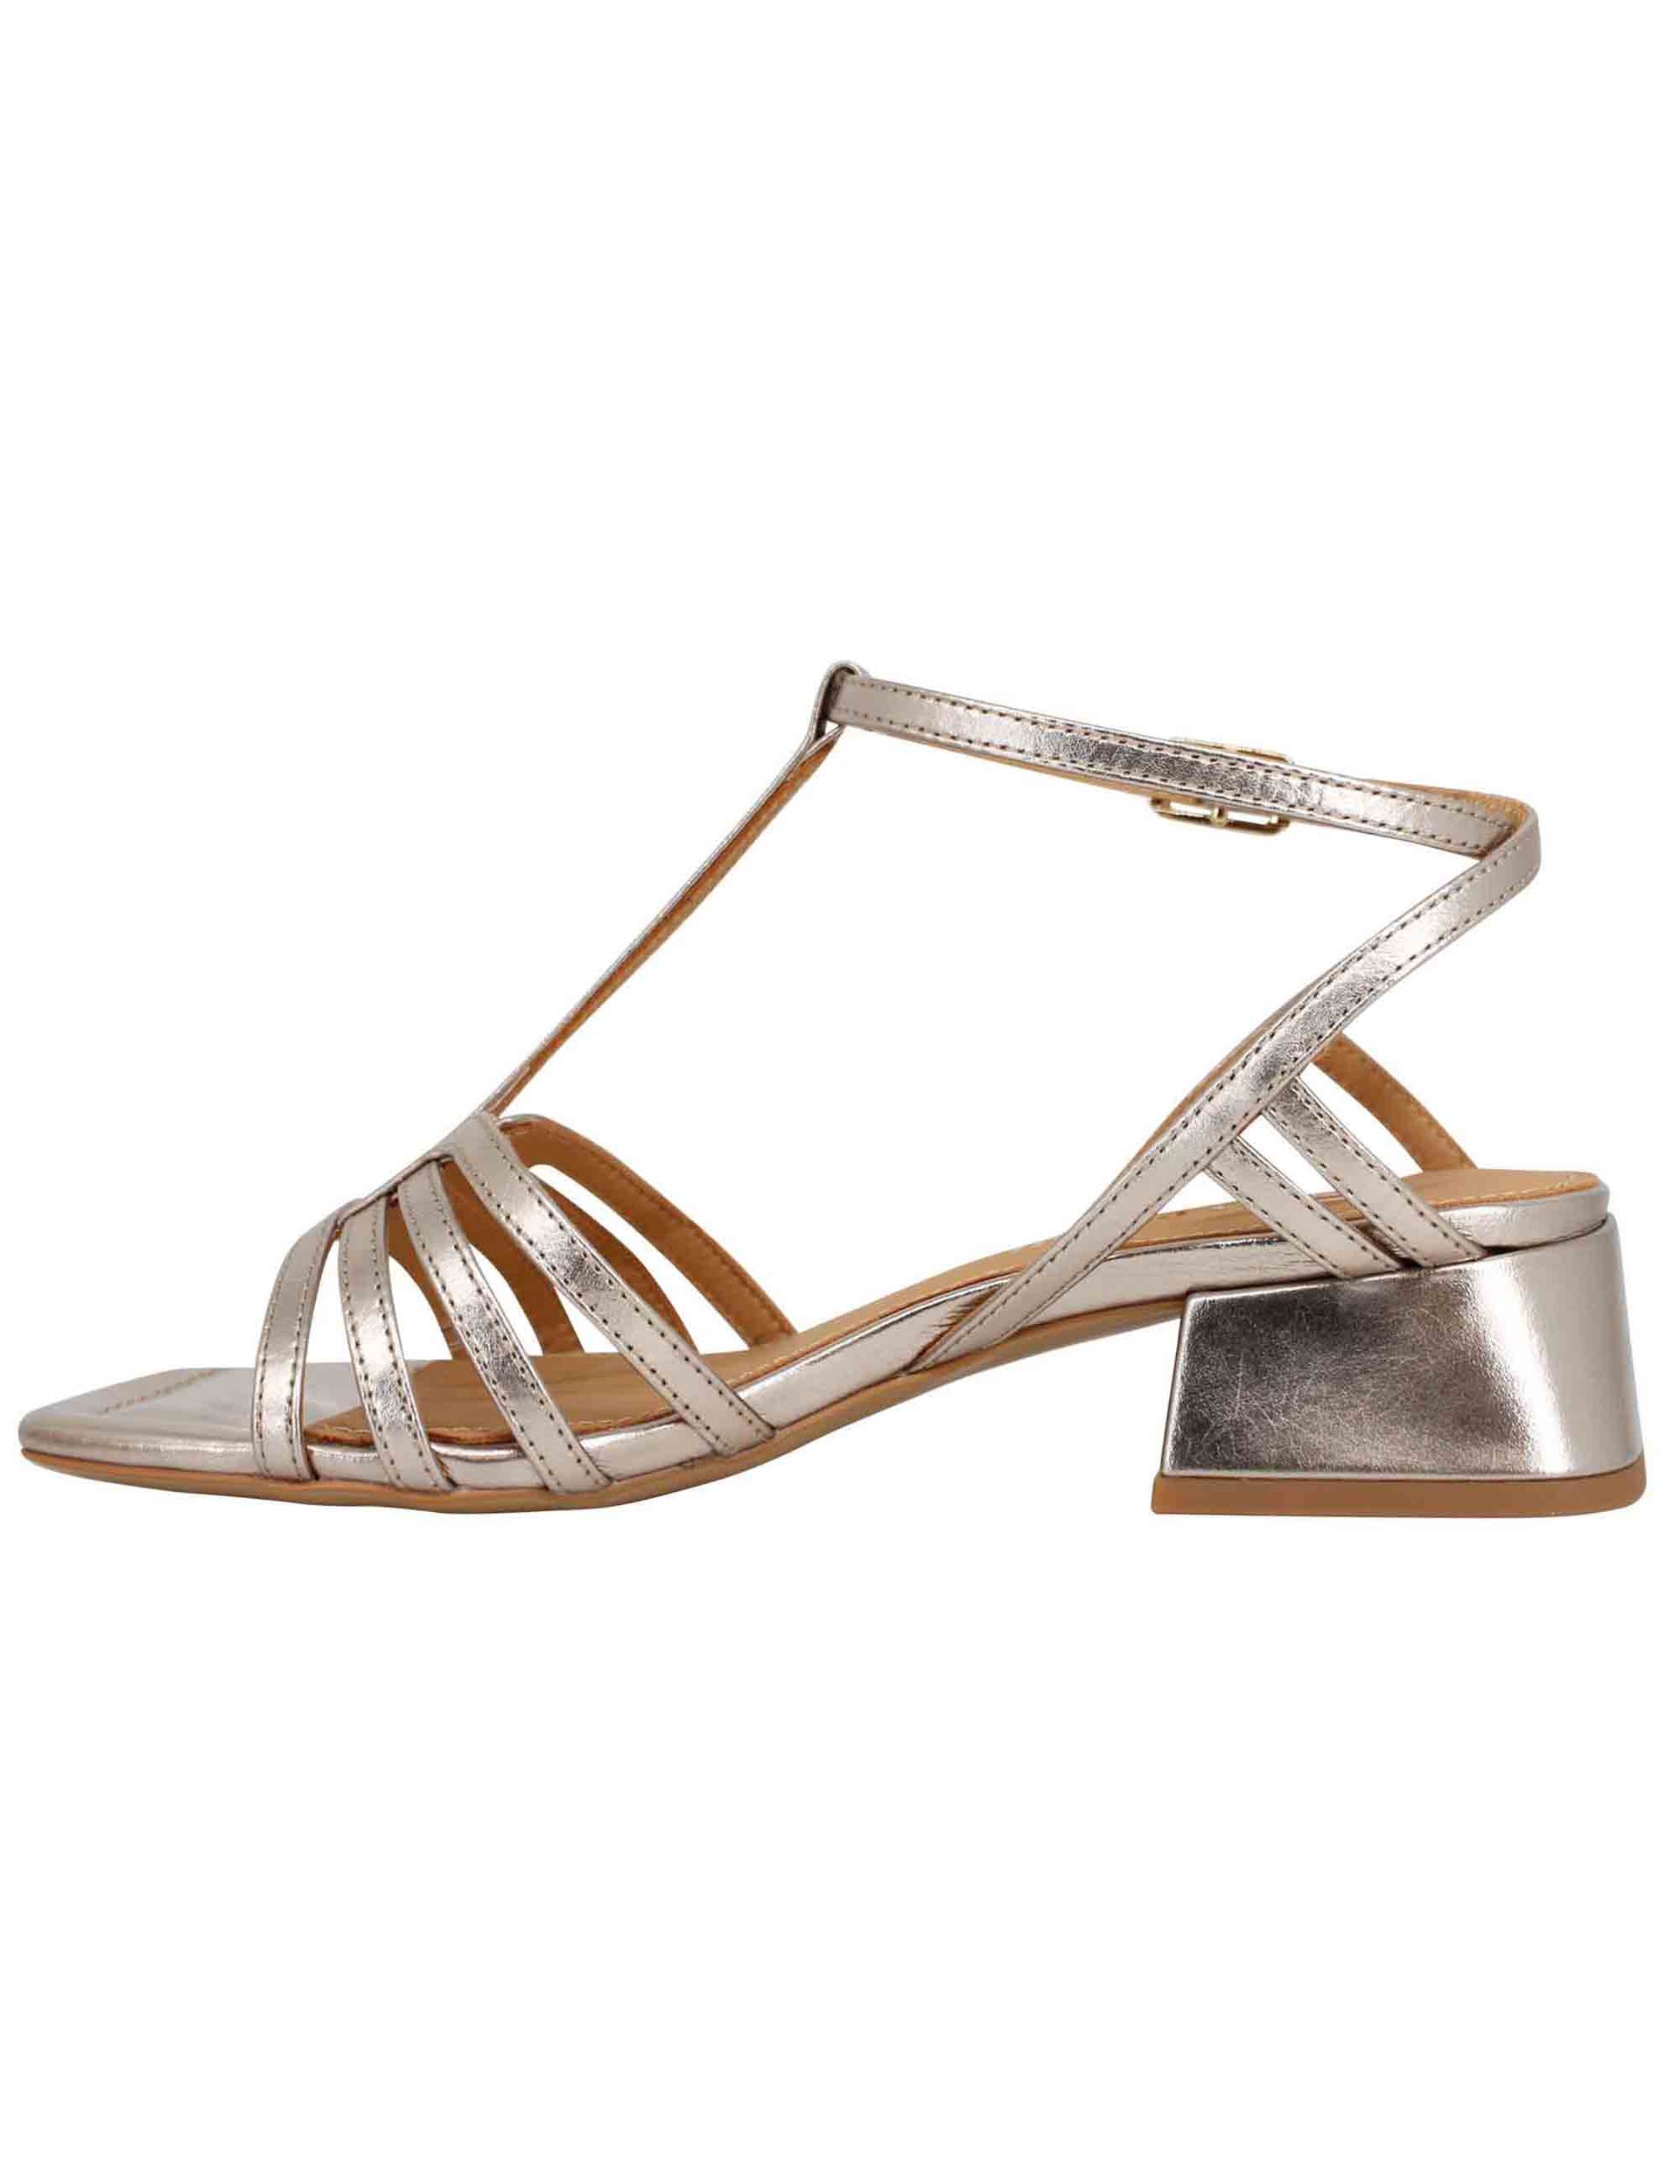 Women's sandals in platinum laminated leather with low heel and ankle strap